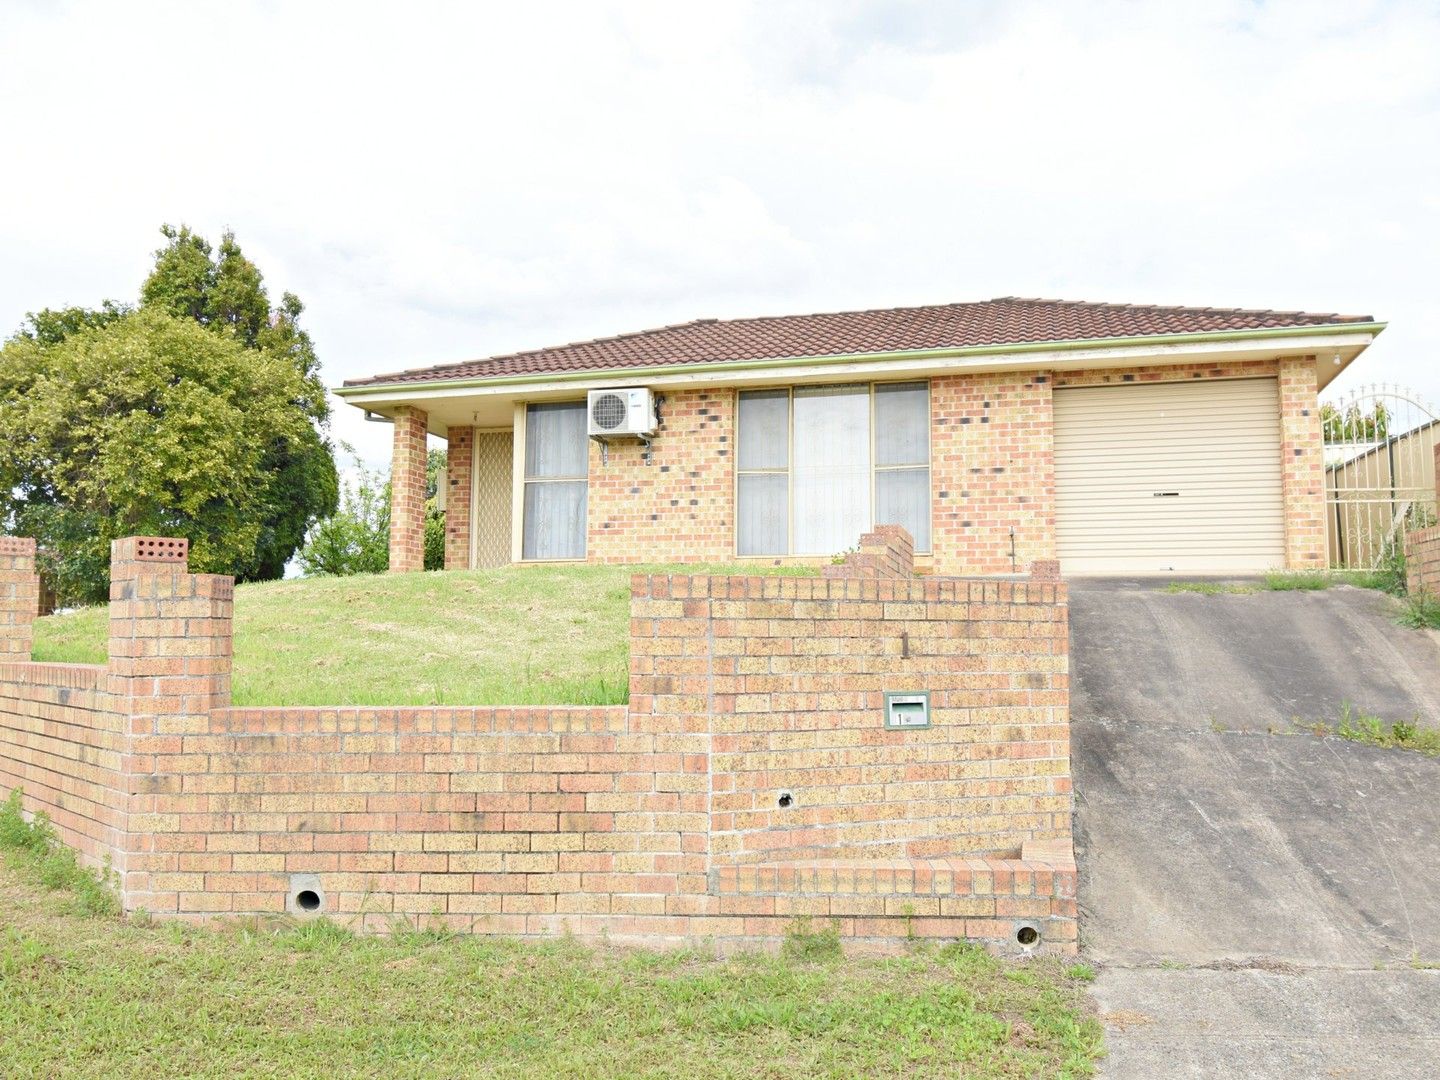 3 bedrooms House in 1 McKell Close BONNYRIGG NSW, 2177